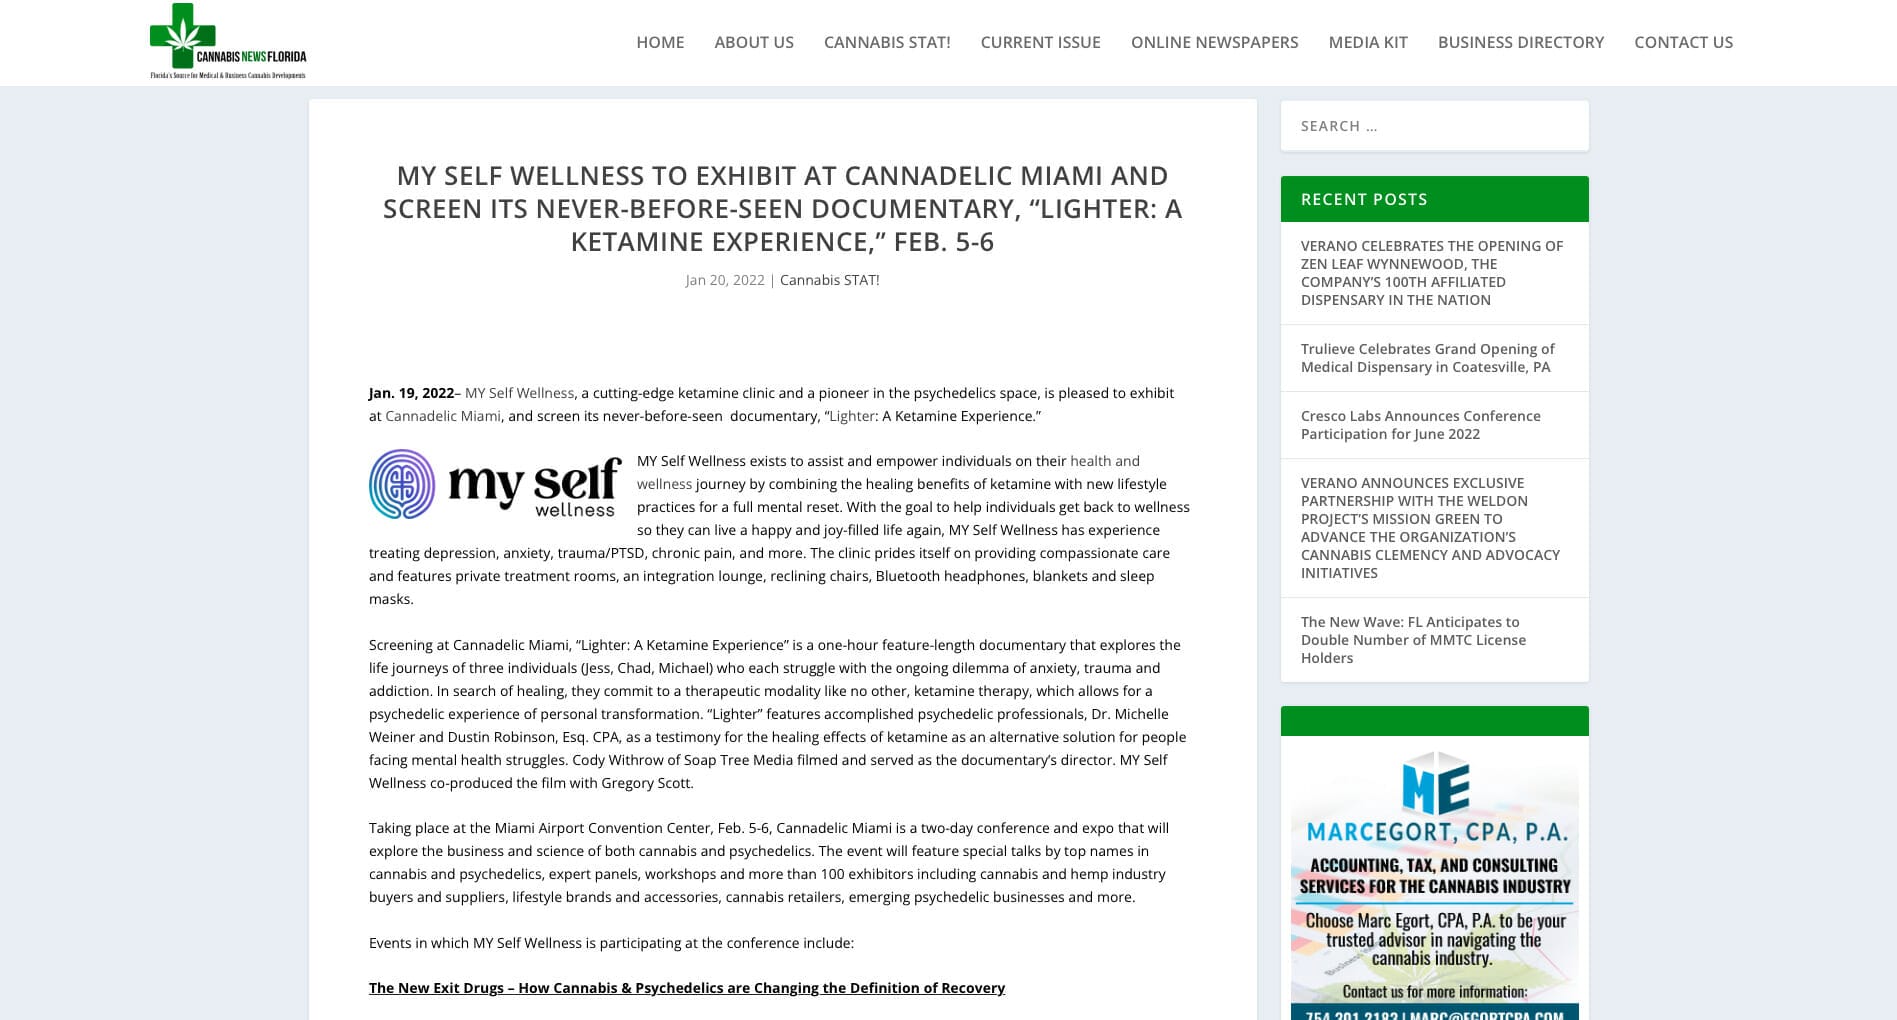 MY Self Wellness to Exhibit at Cannaddelic Miami and Screen its Never-Before-Seen Documentary